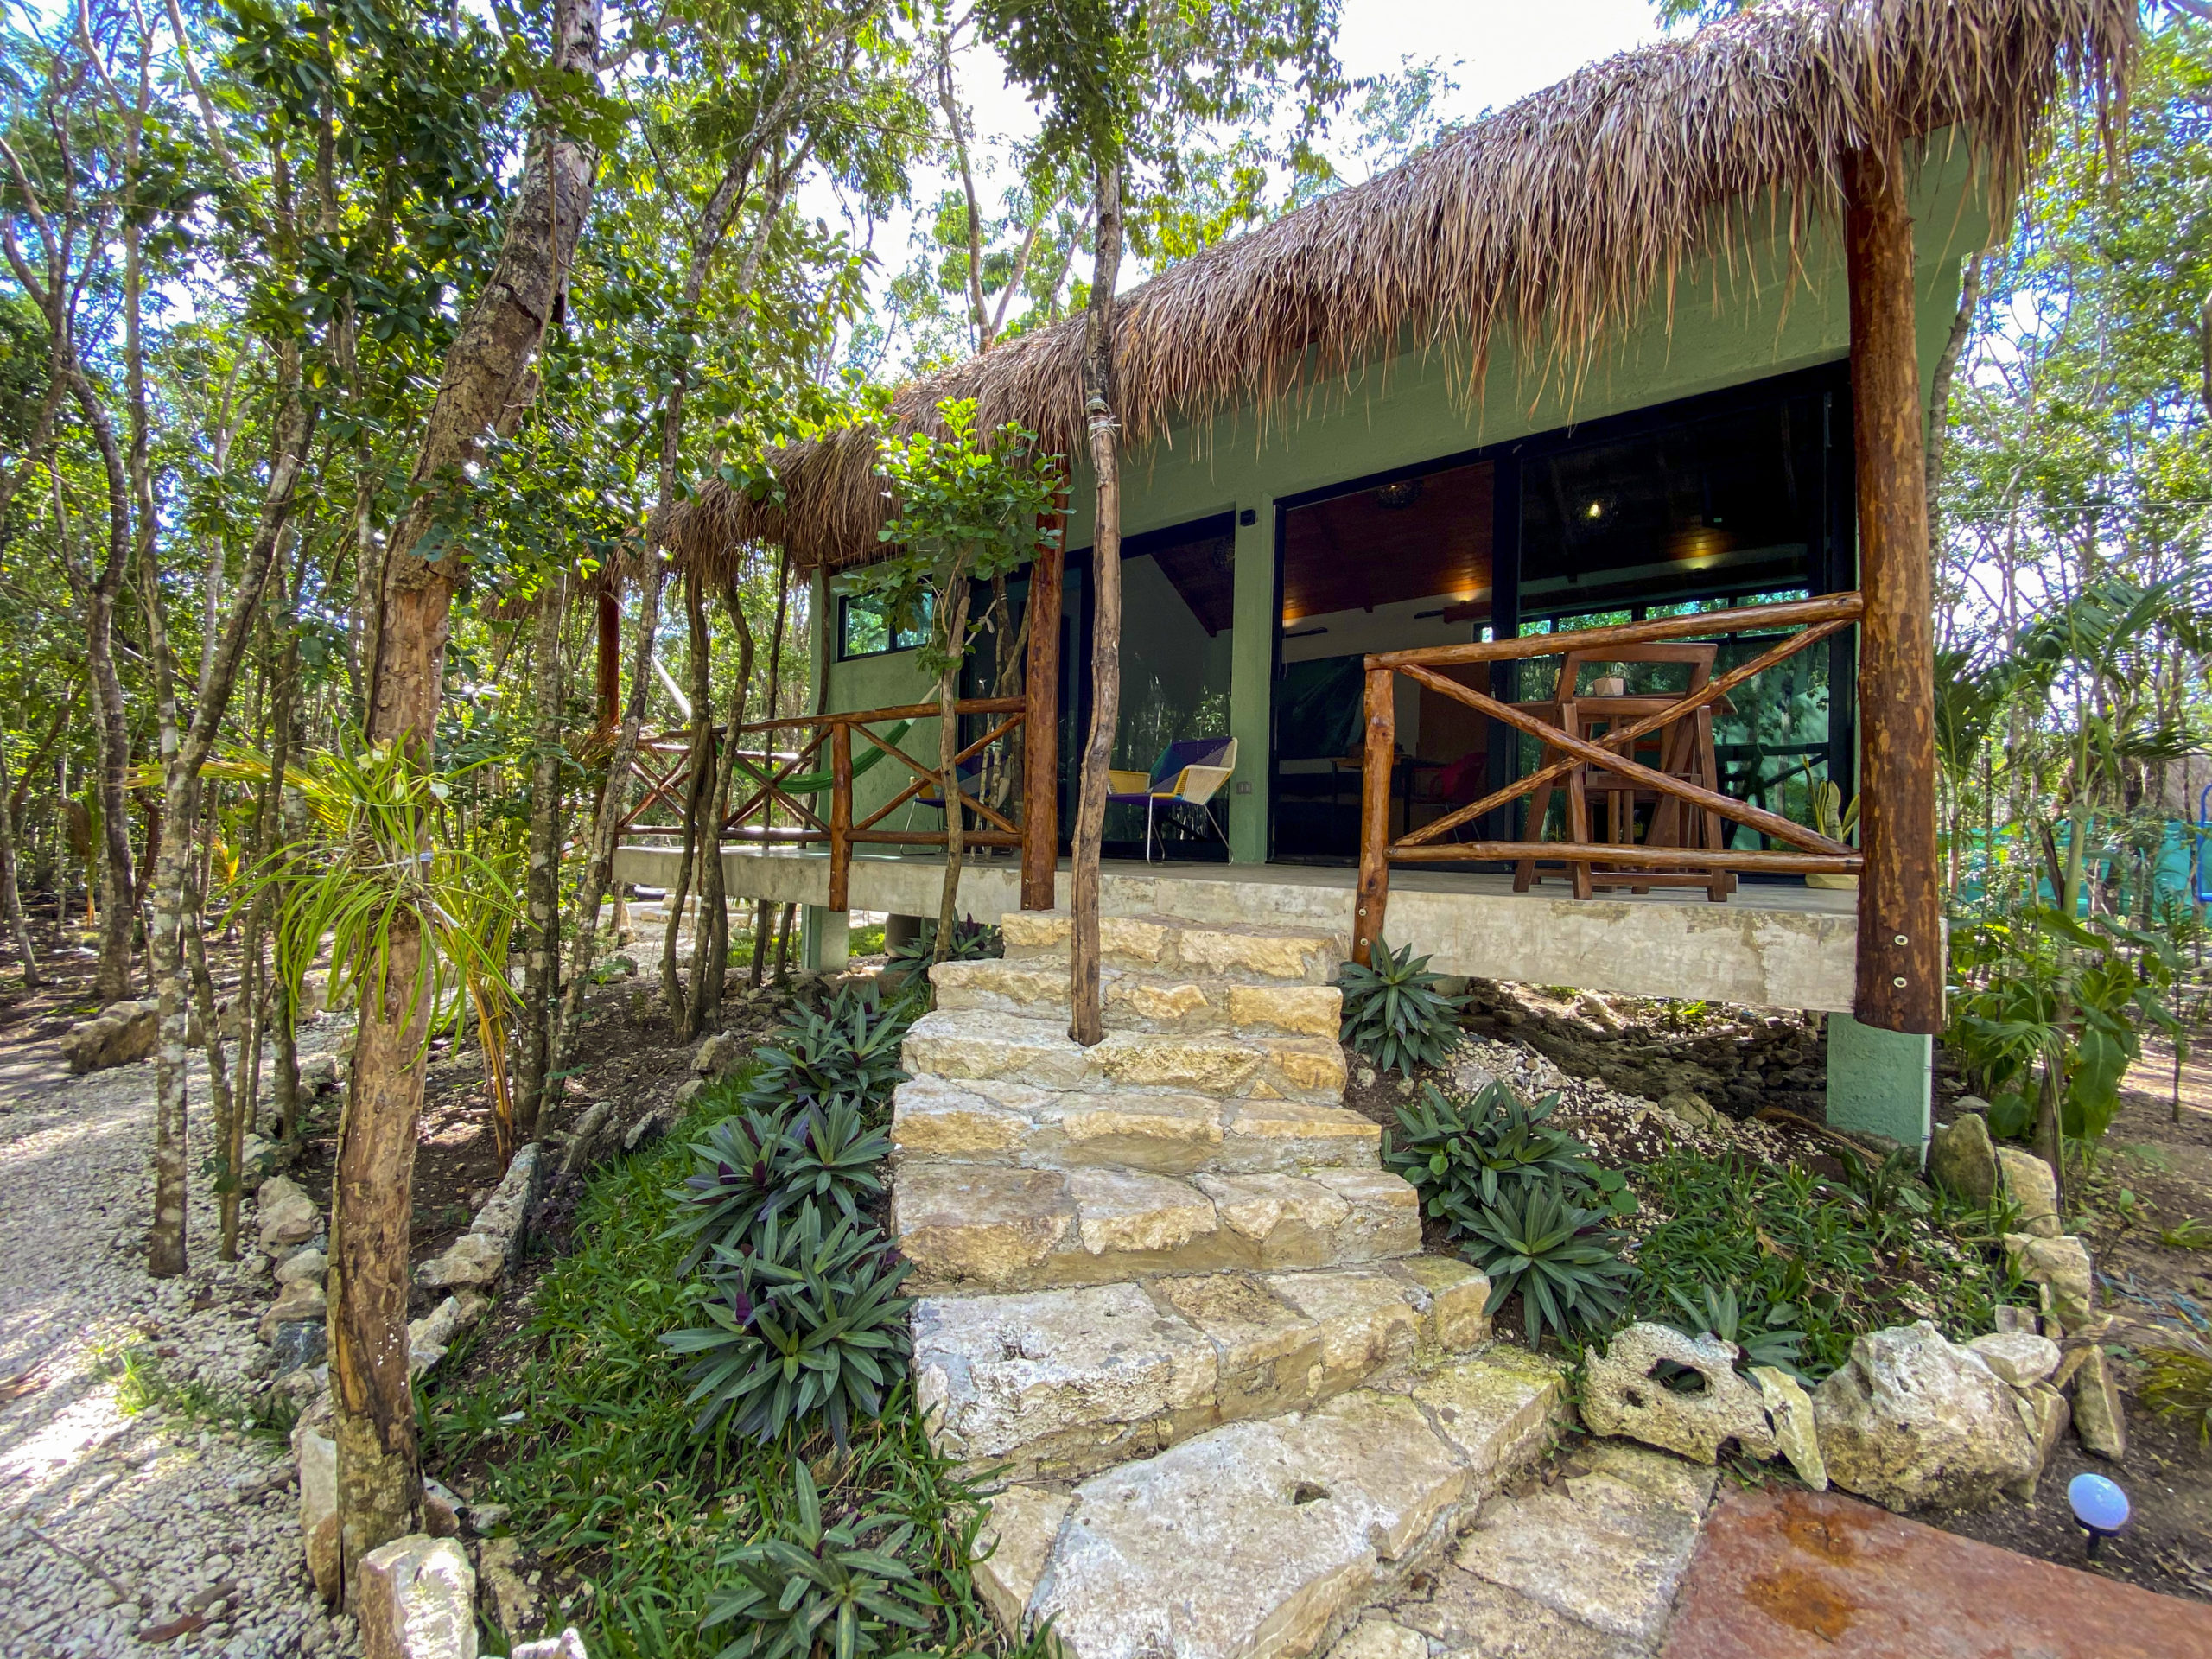 Villa Jaguar, accommodation in Cozumel, exterior, nature, in front, plants, stairs, Cozumel